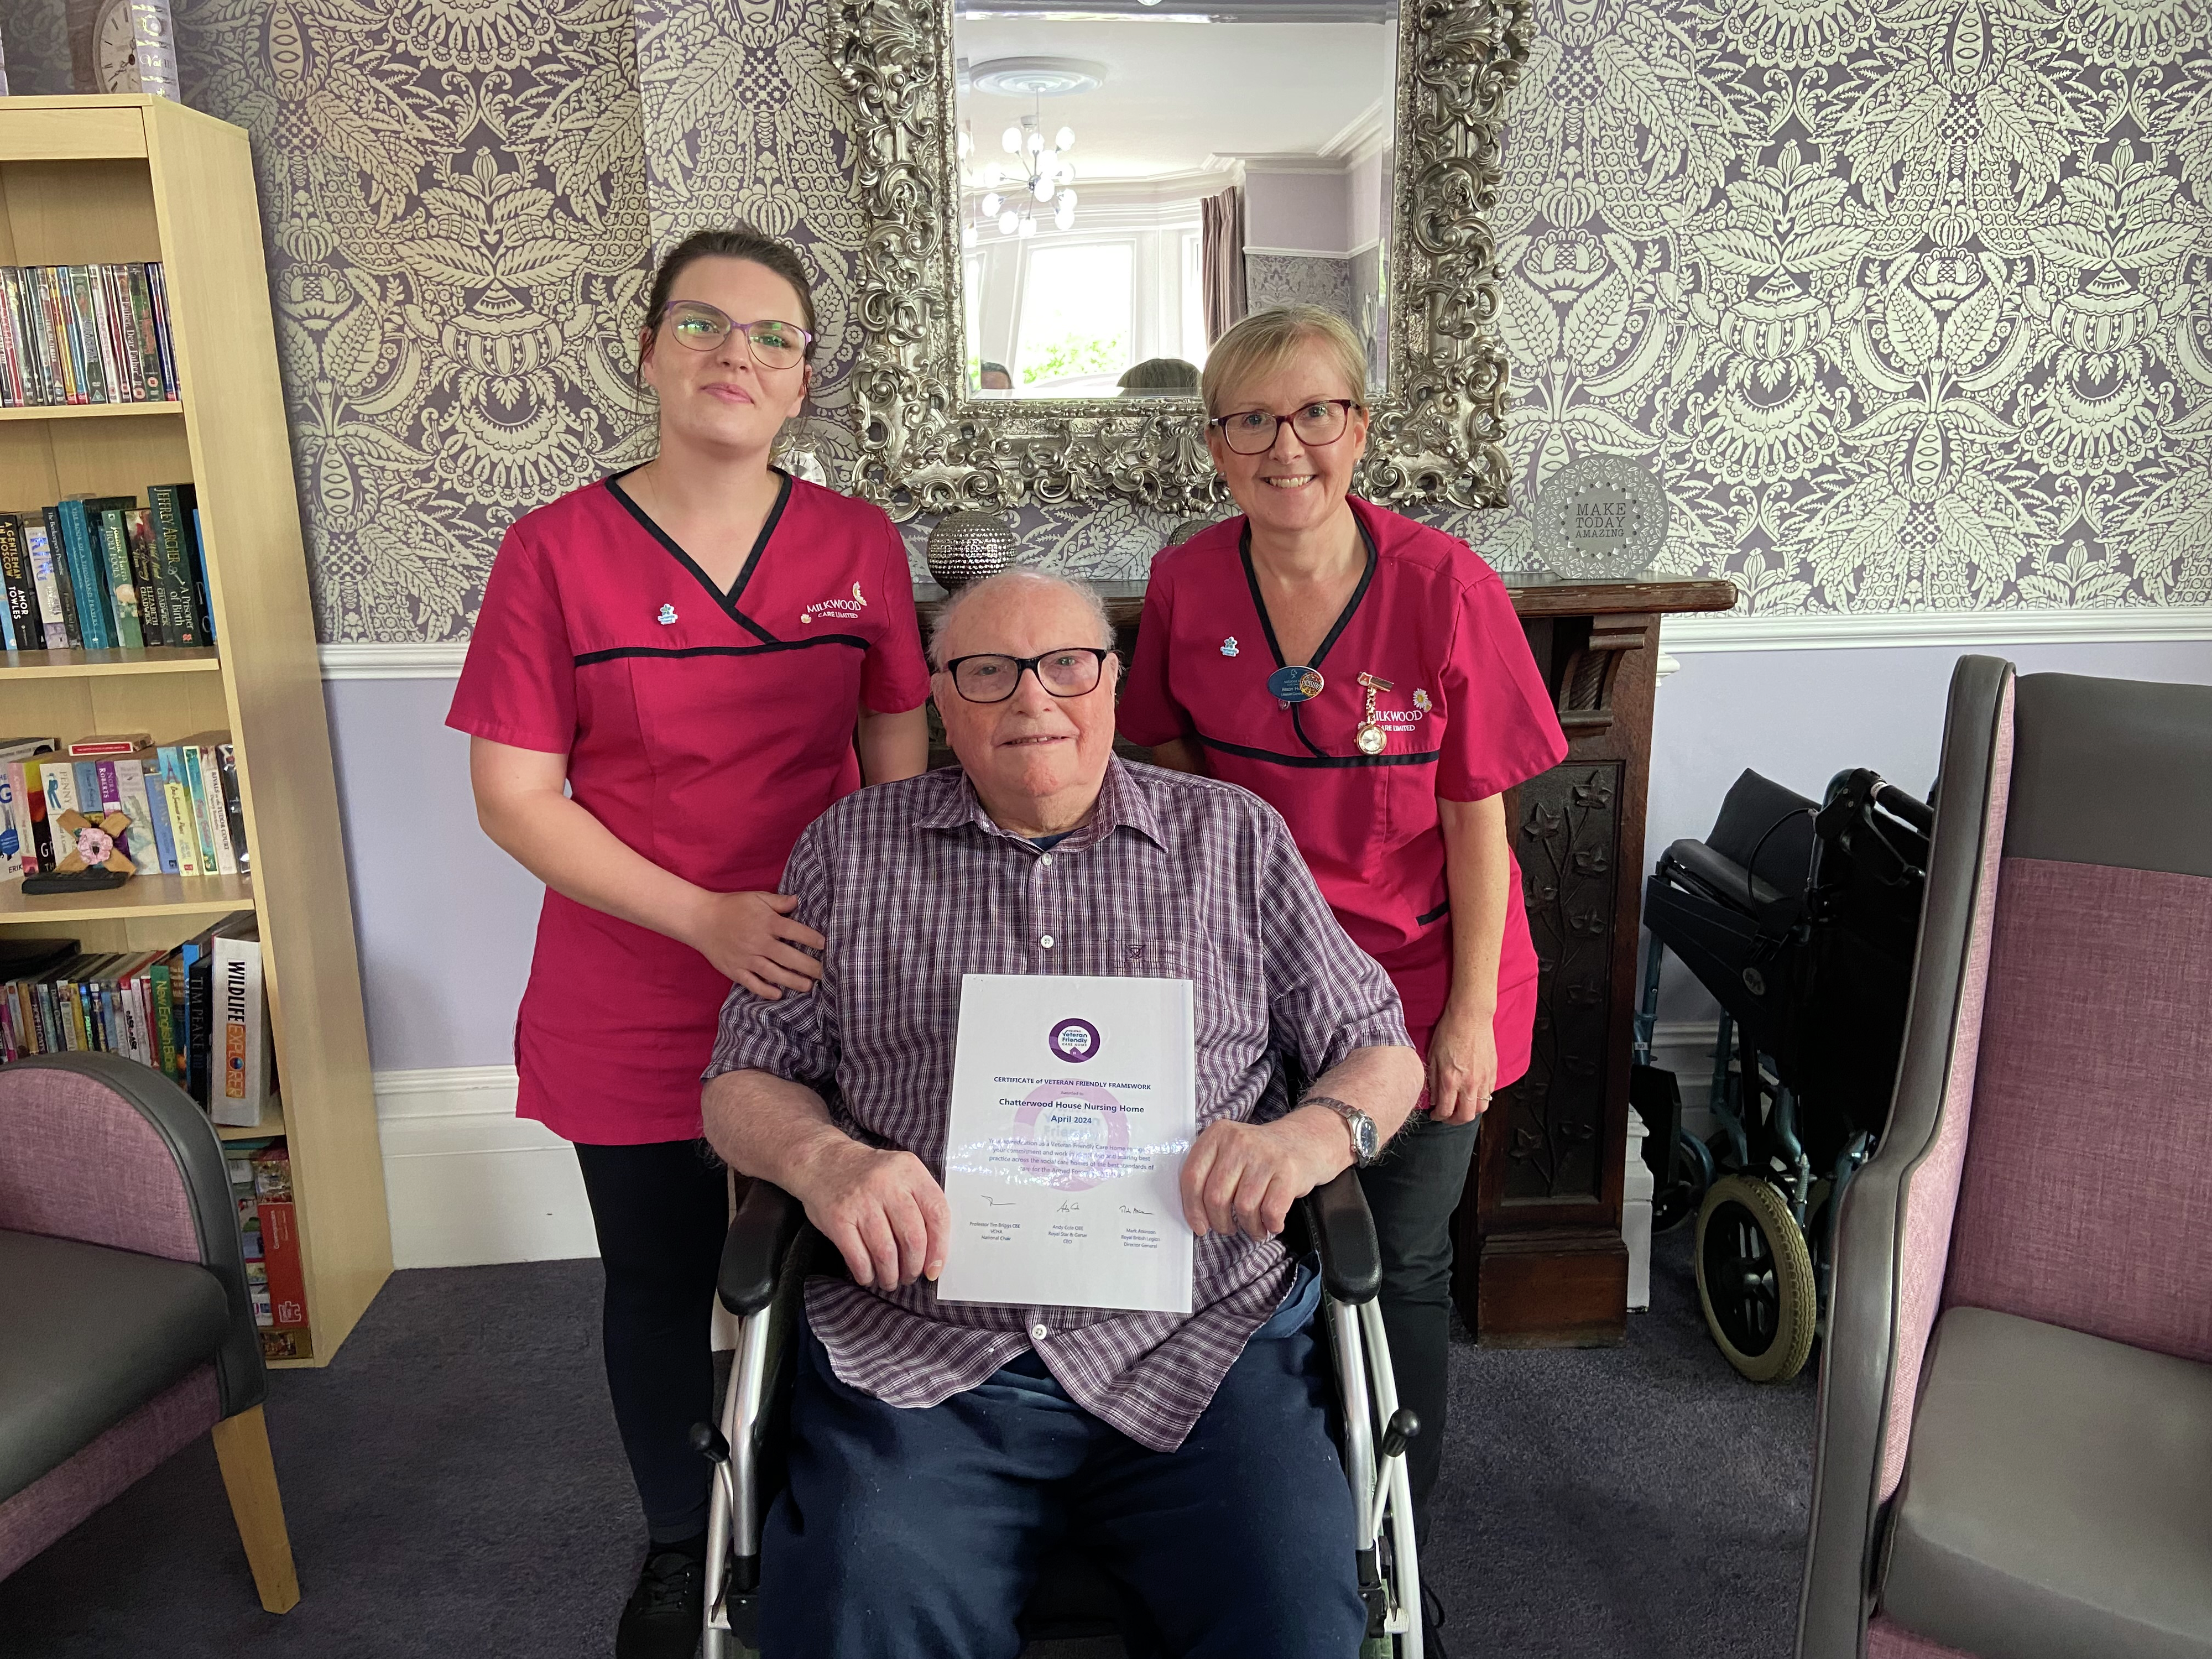 Local care home has received their certification of accreditation as a Veteran friendly care home